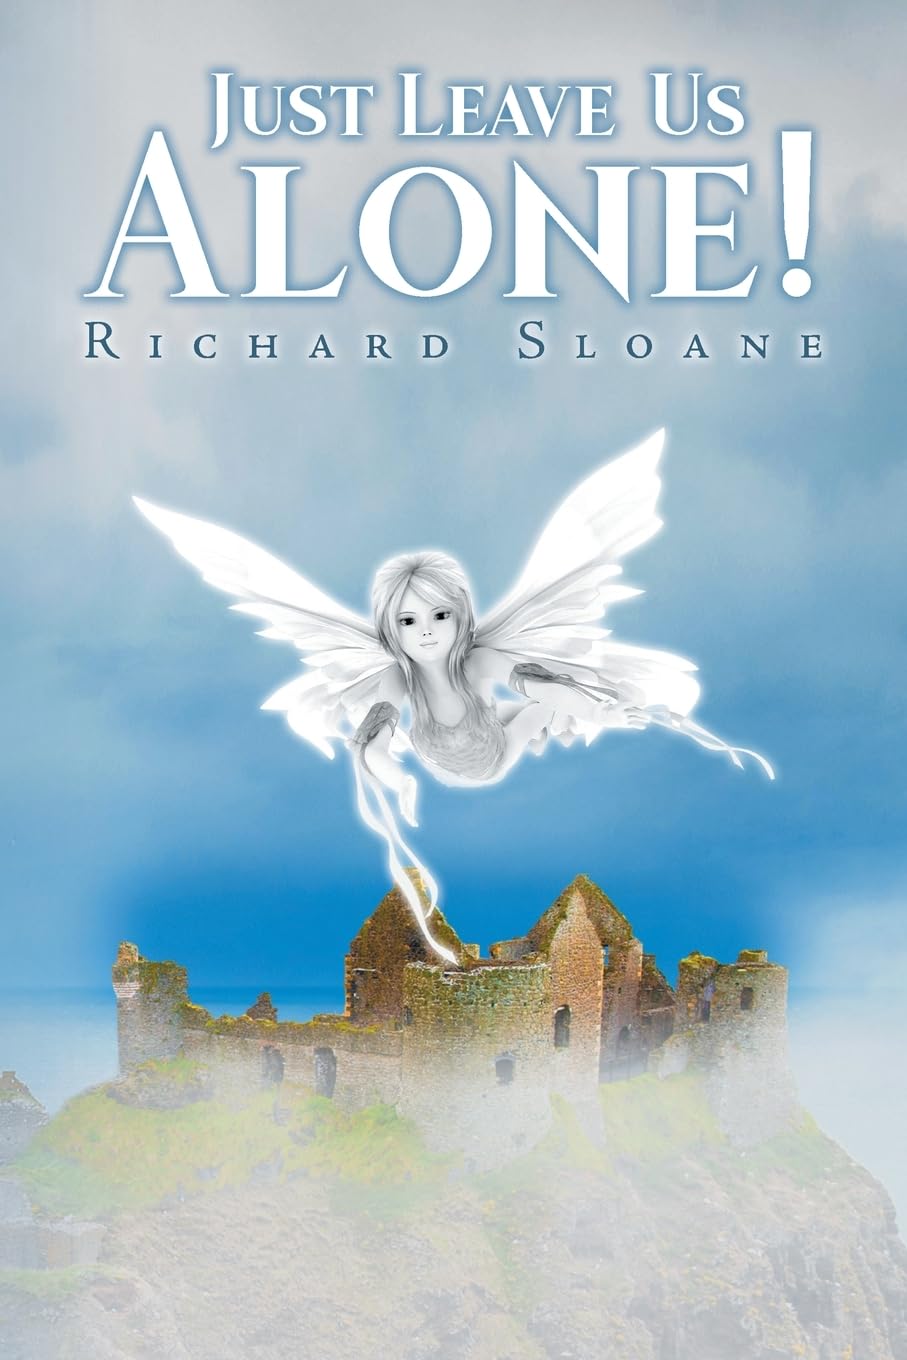 Whimsical Wonders: Dive into Richard Sloane's 'Just Leave Us Alone!'